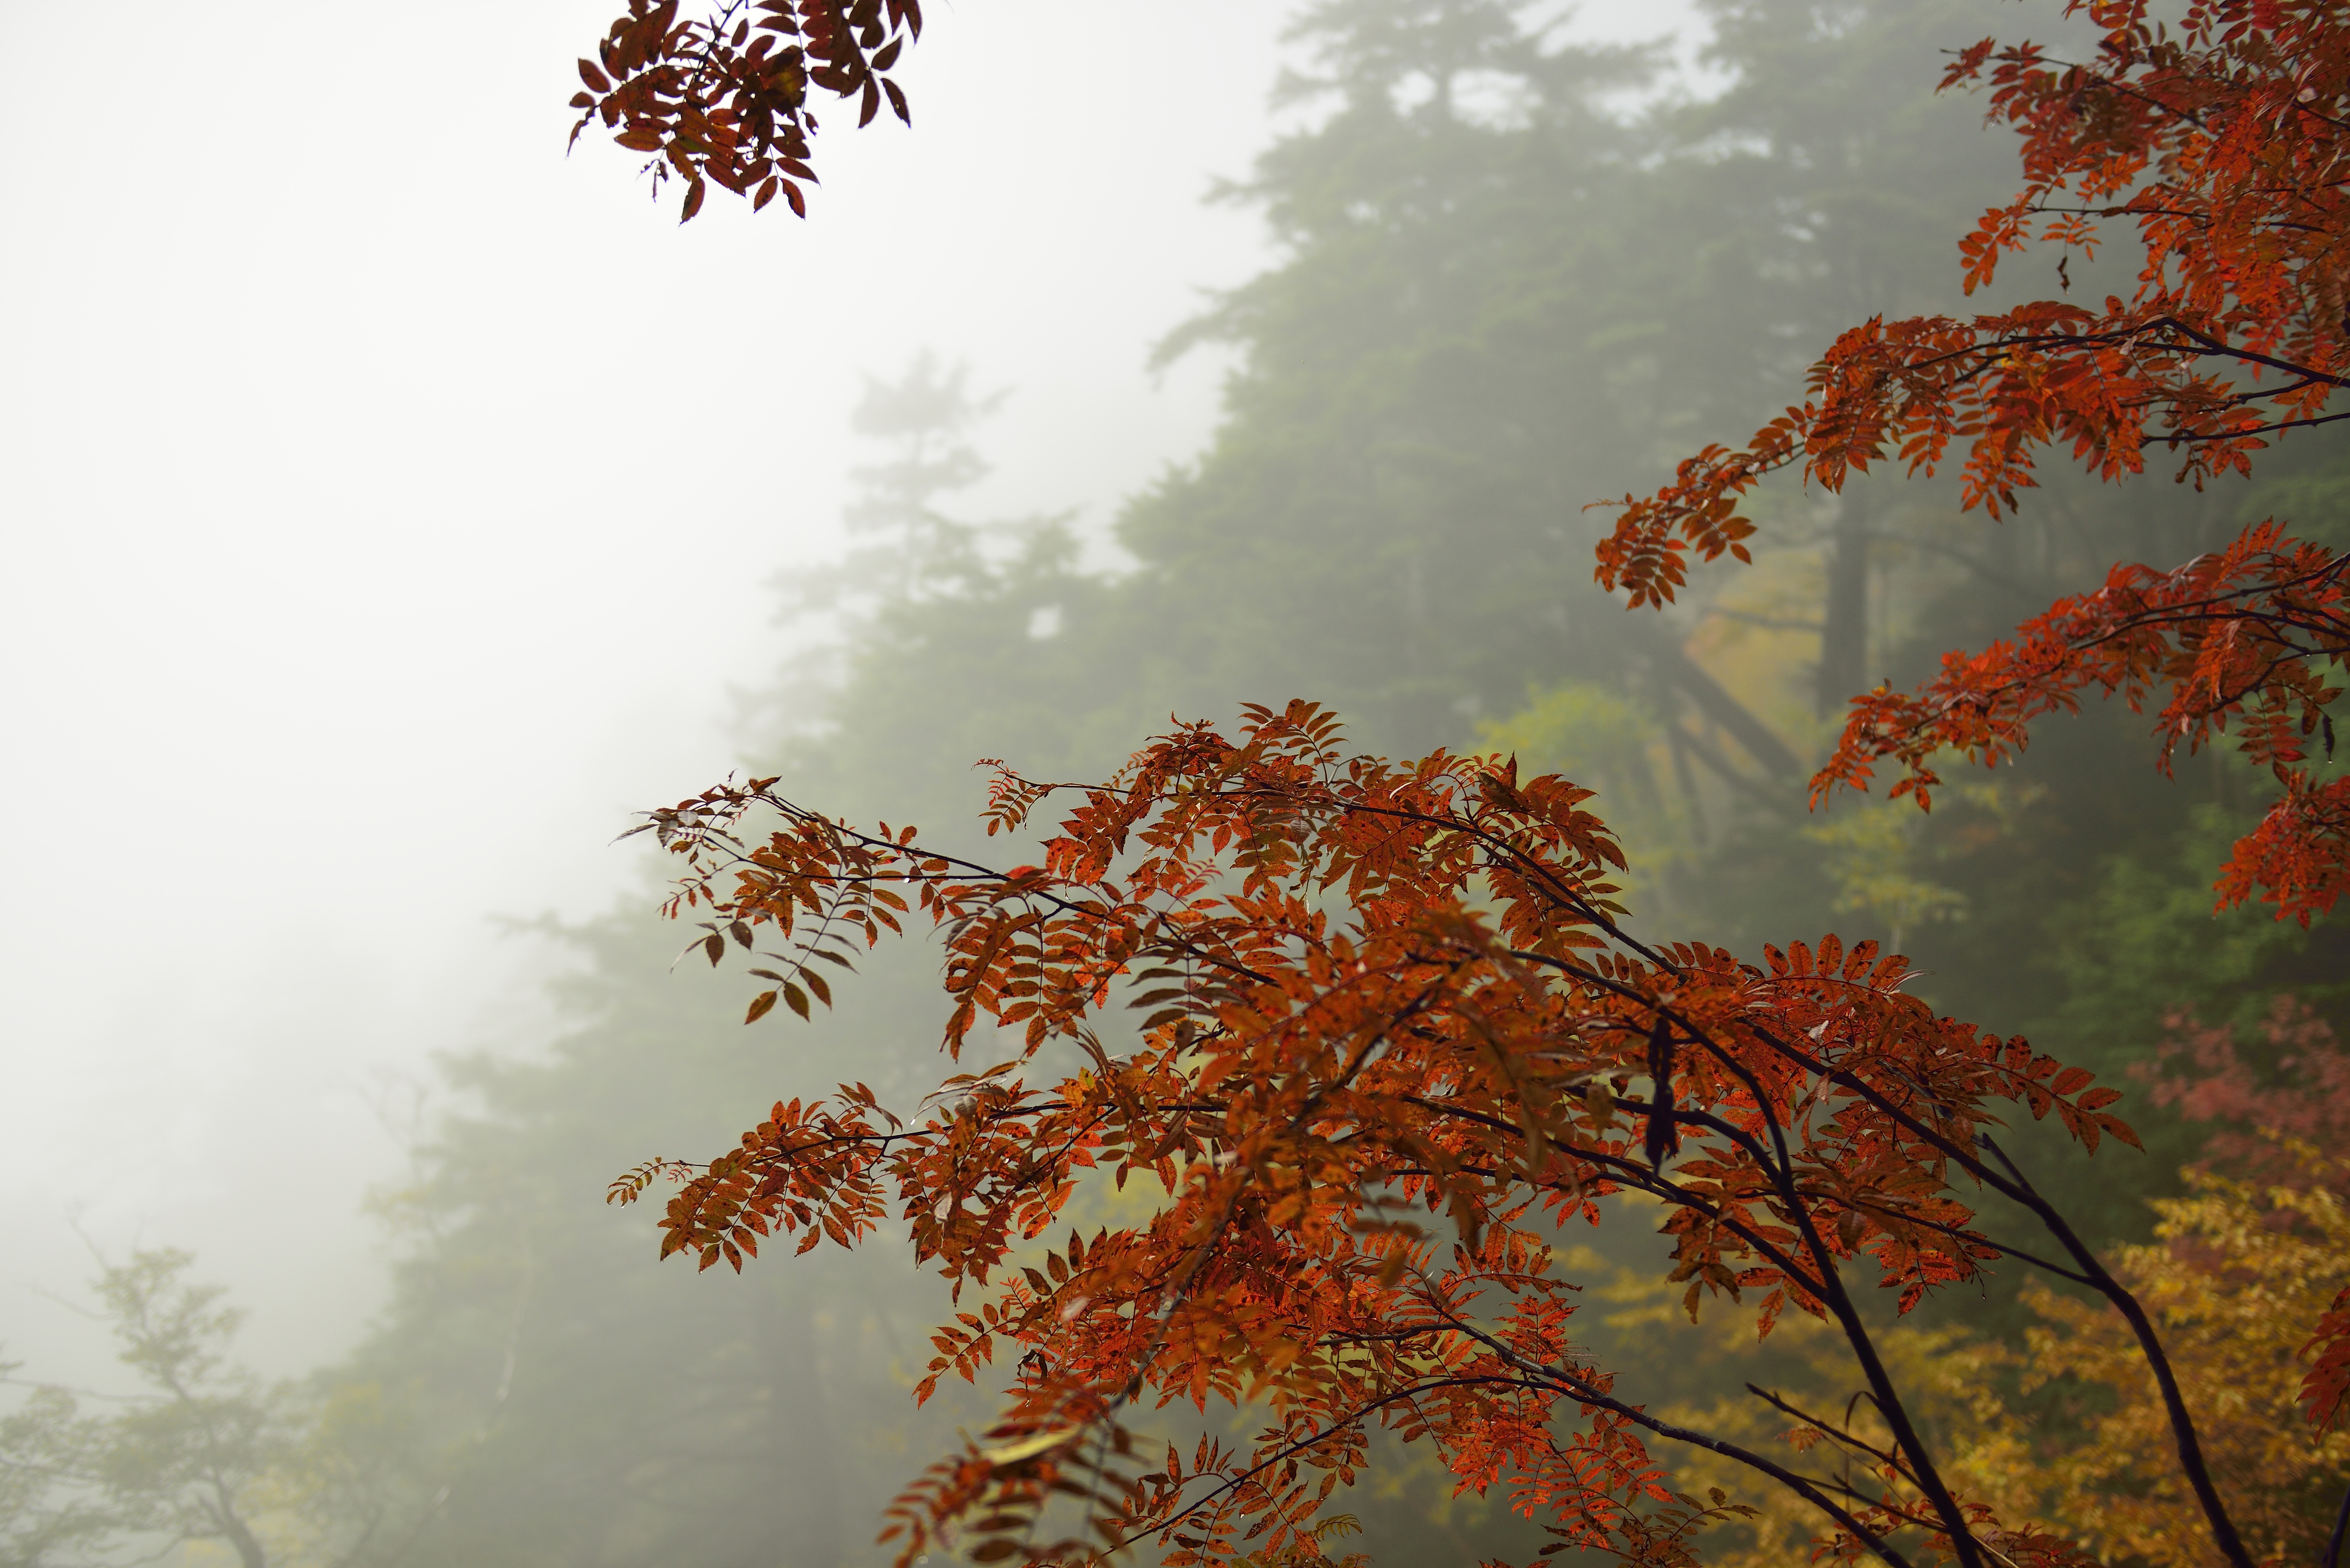 General 7360x4912 leaves trees nature mist fall